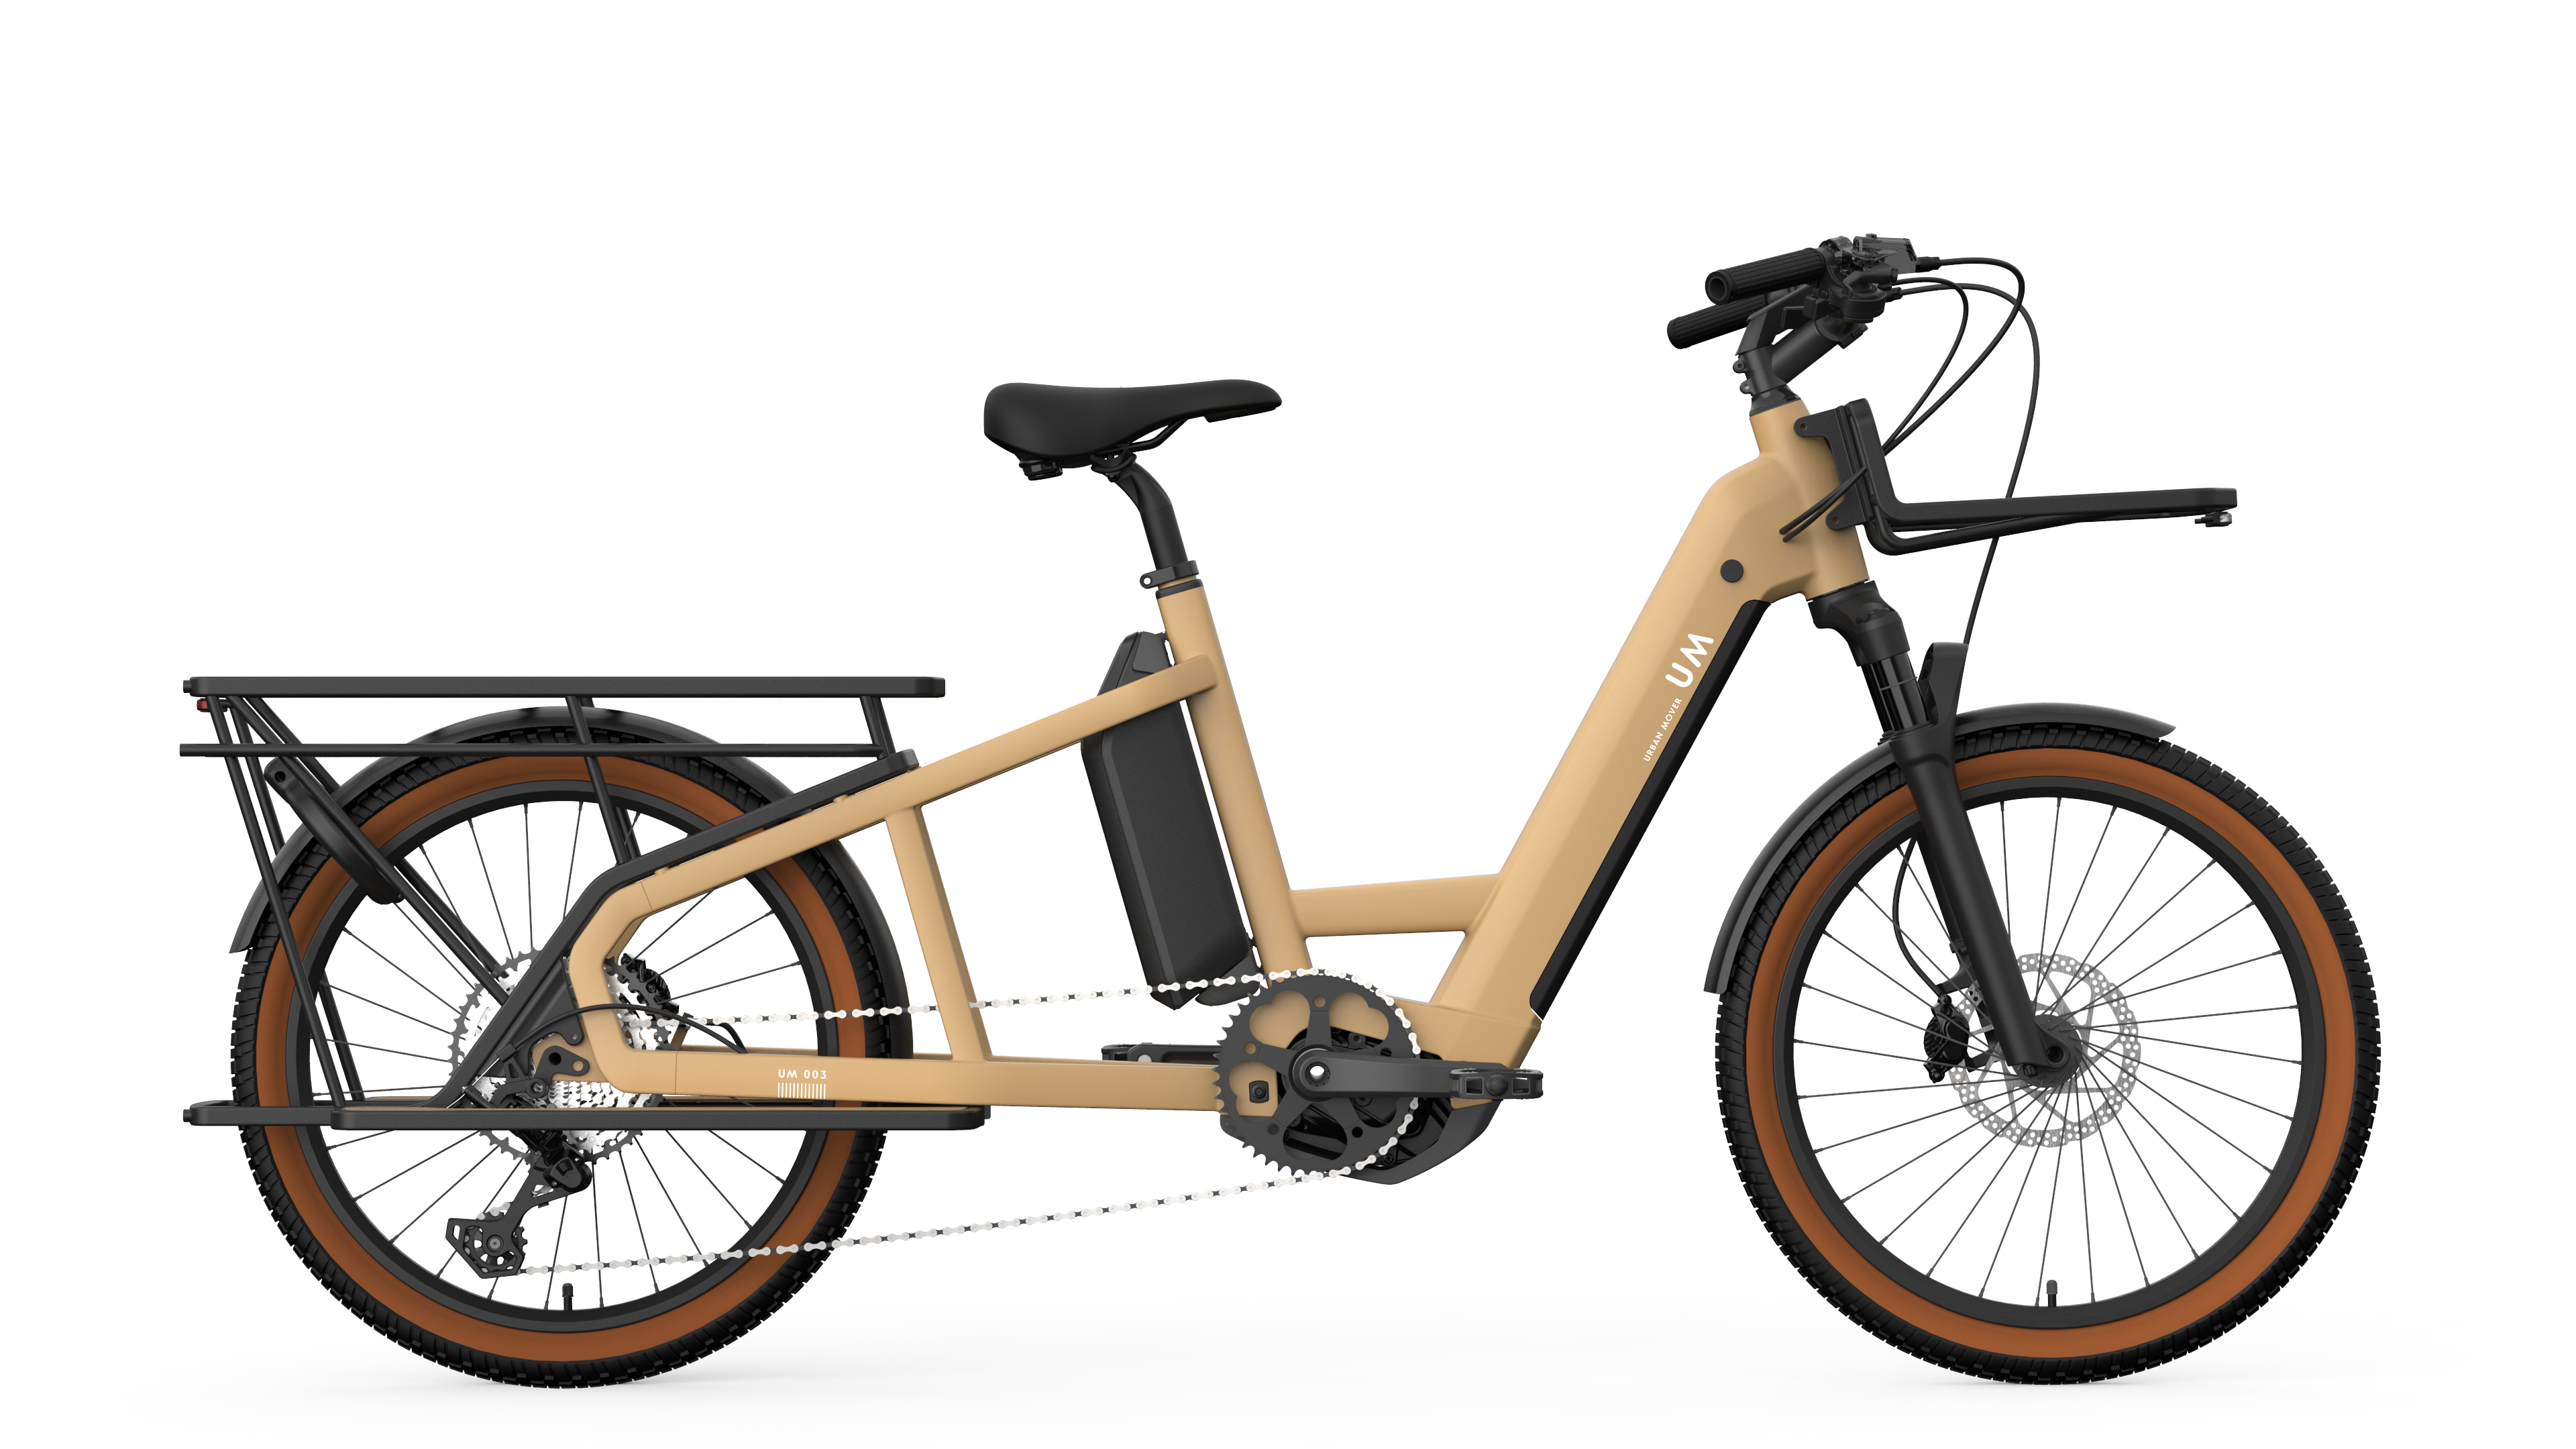 The Urban Mover - long tail cargo bike